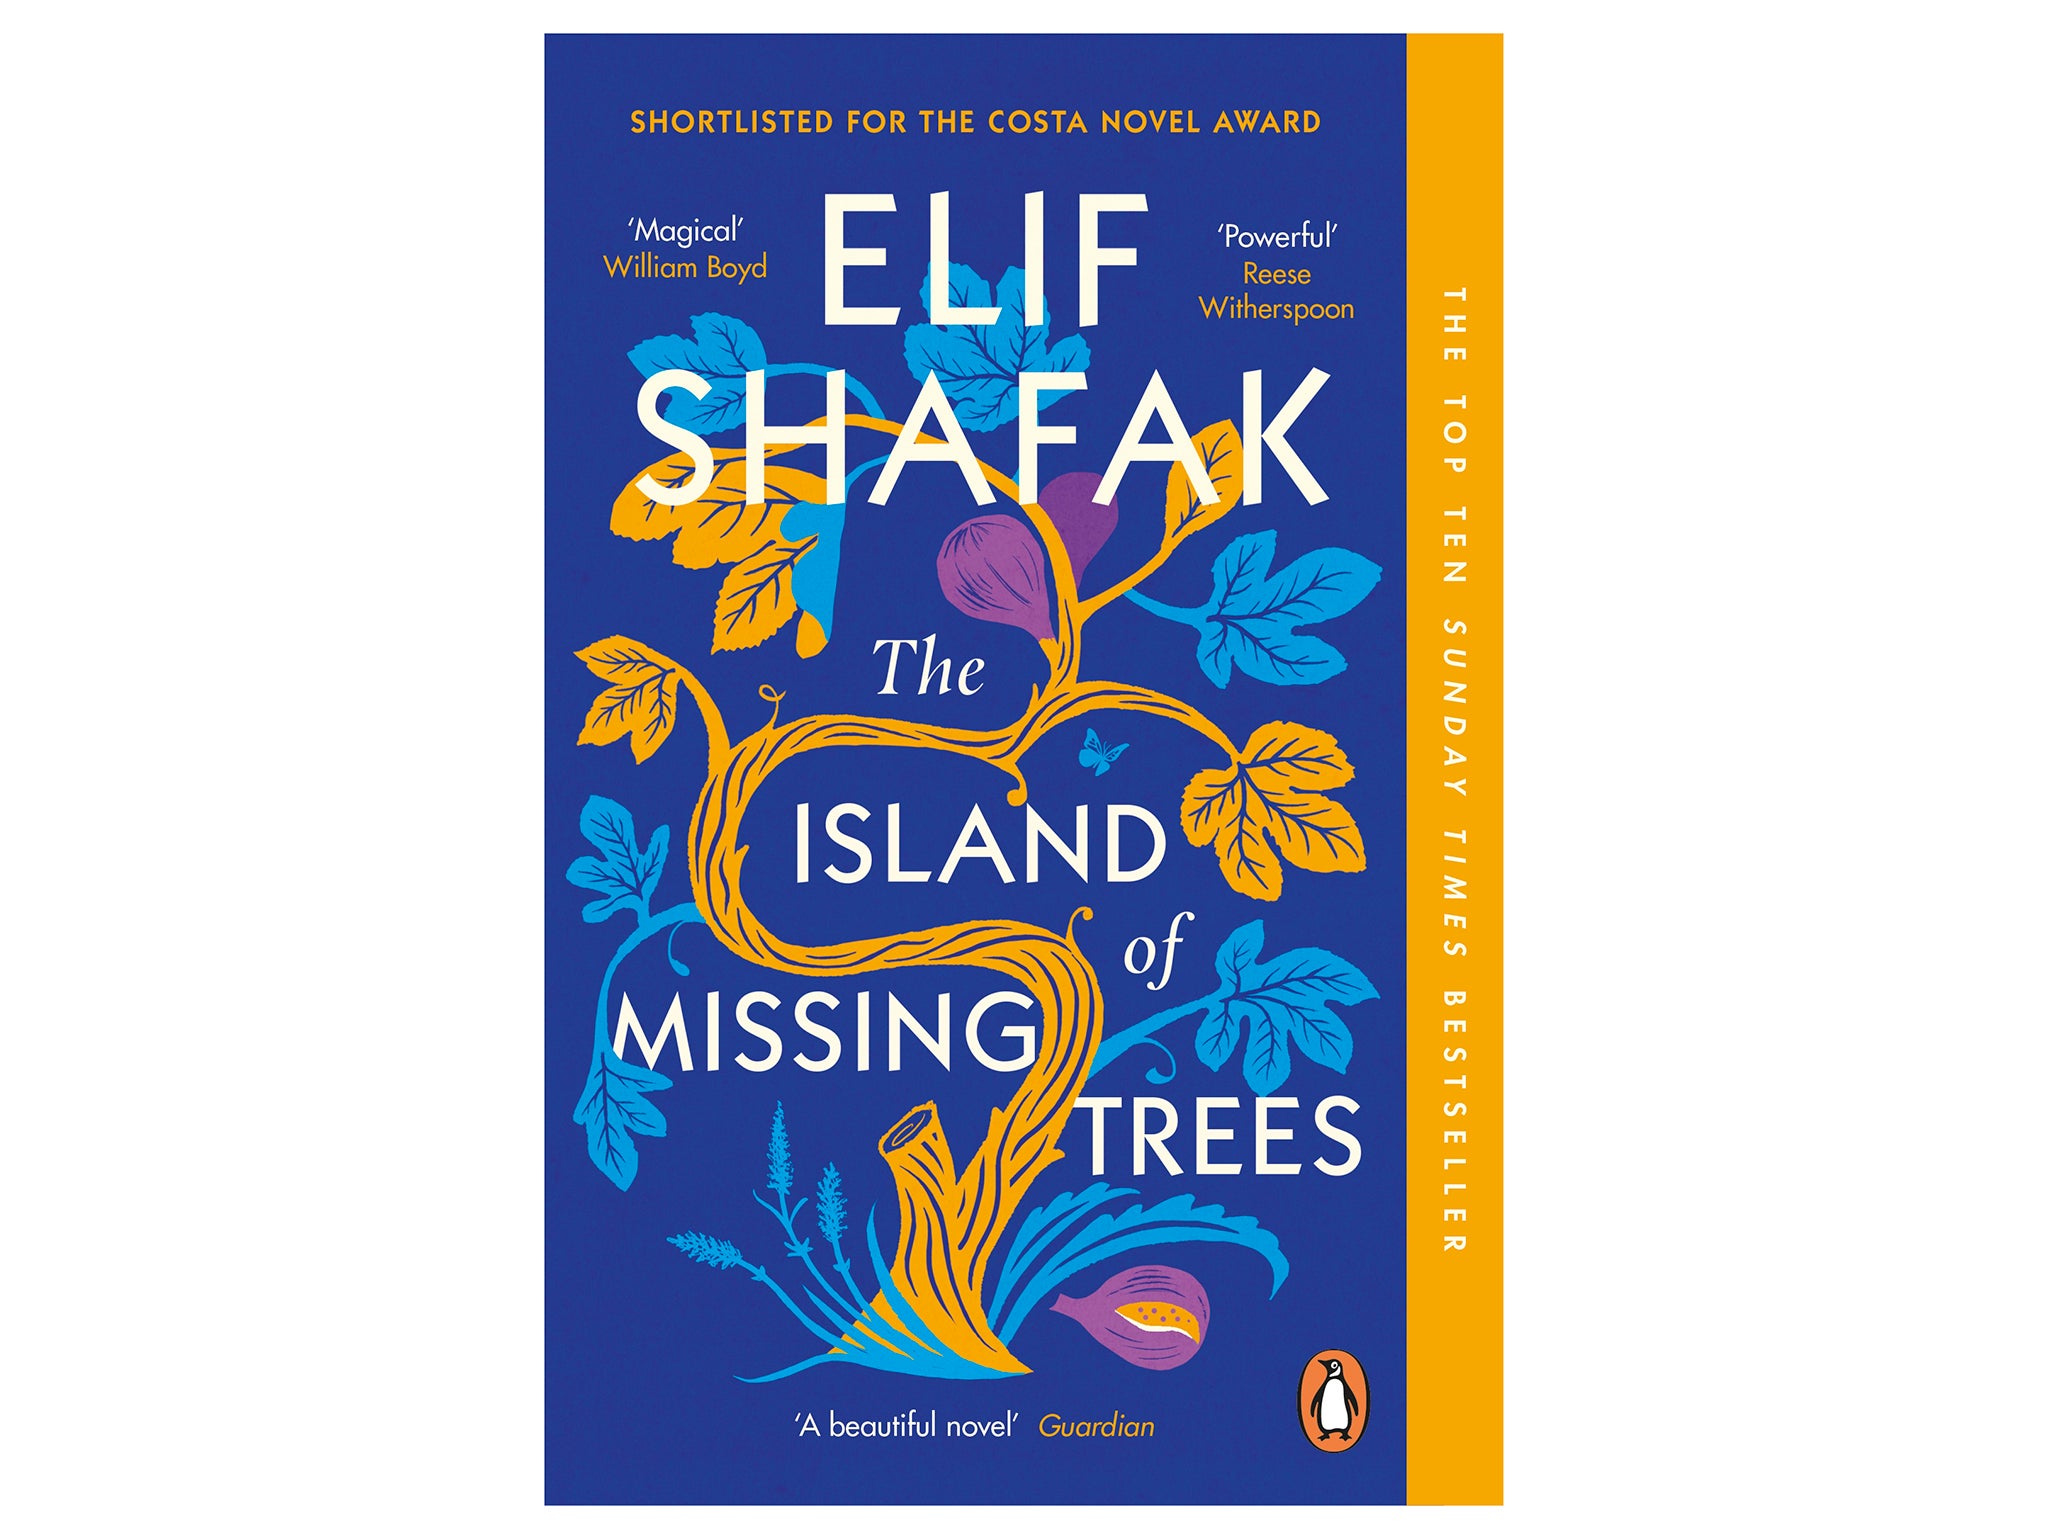 The-Island-of-Missing-Trees-indybest-womens-prize-for-fiction-shortlist-2022 